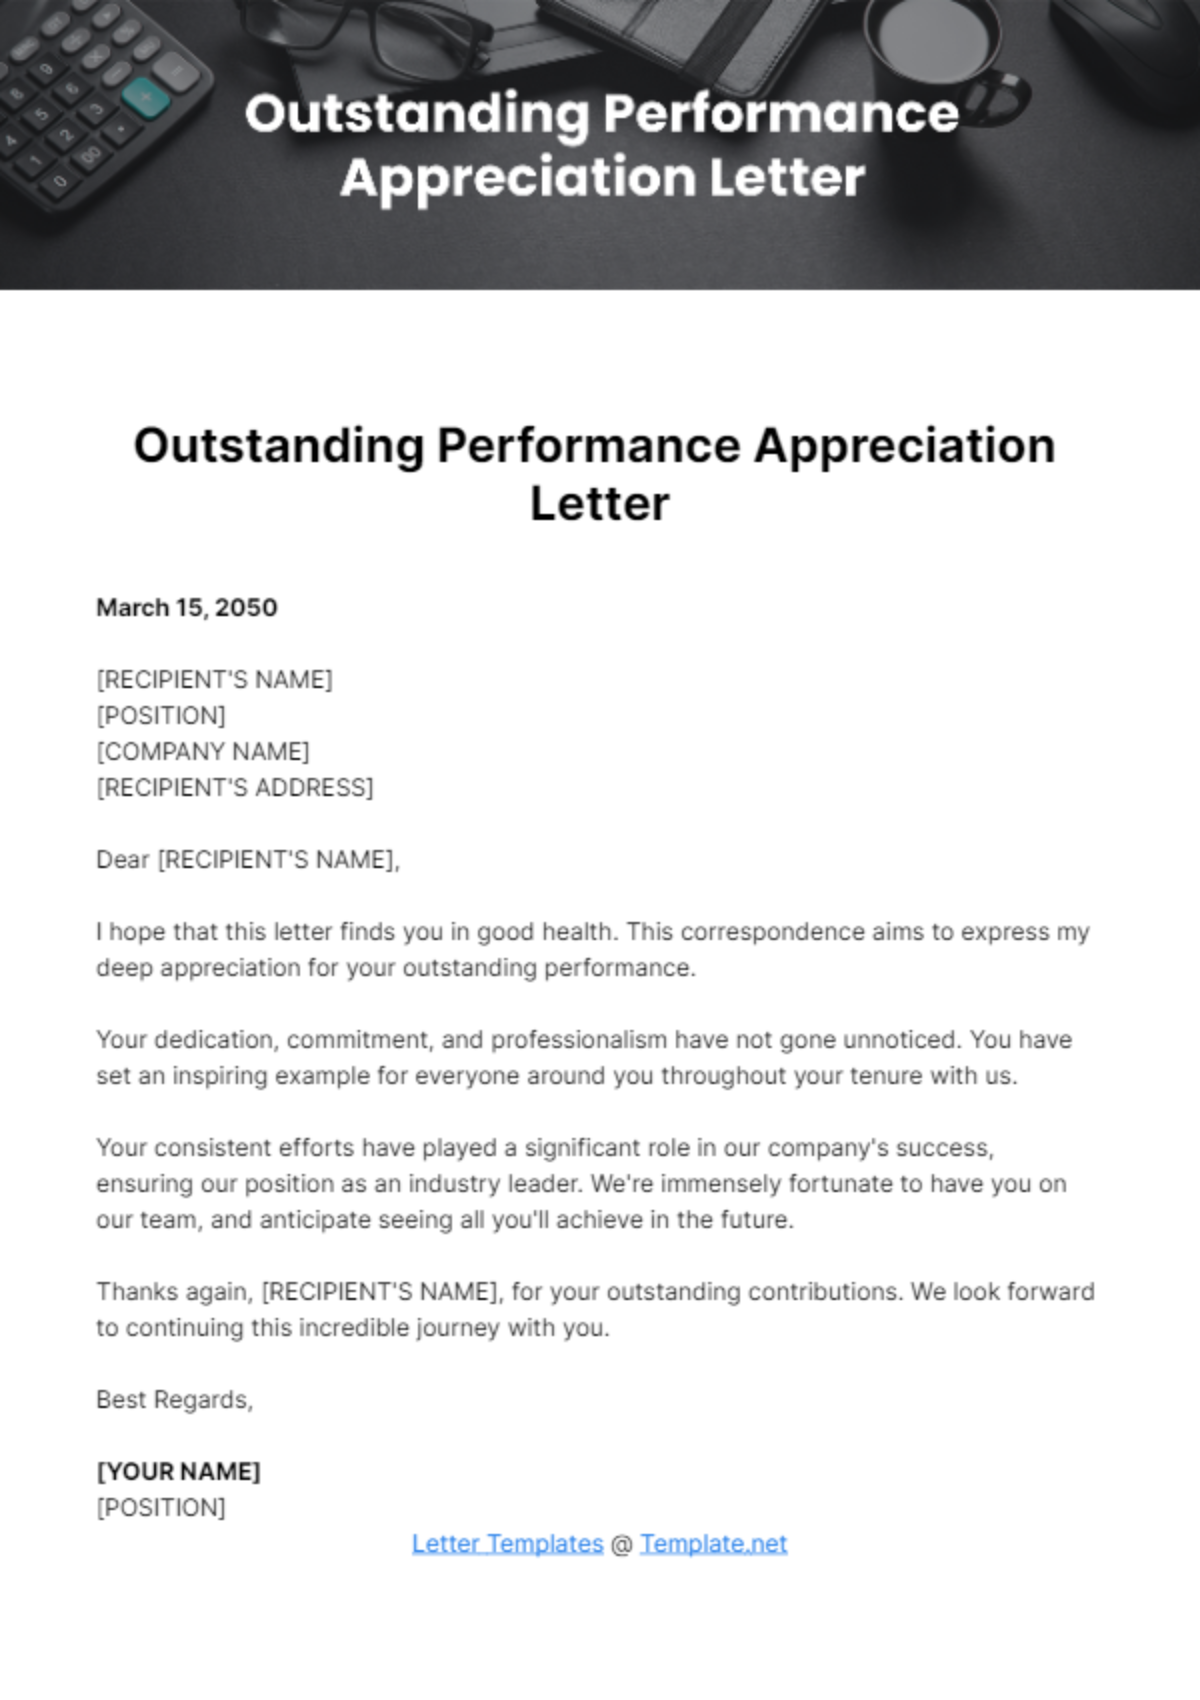 Free Outstanding Performance Appreciation Letter Template